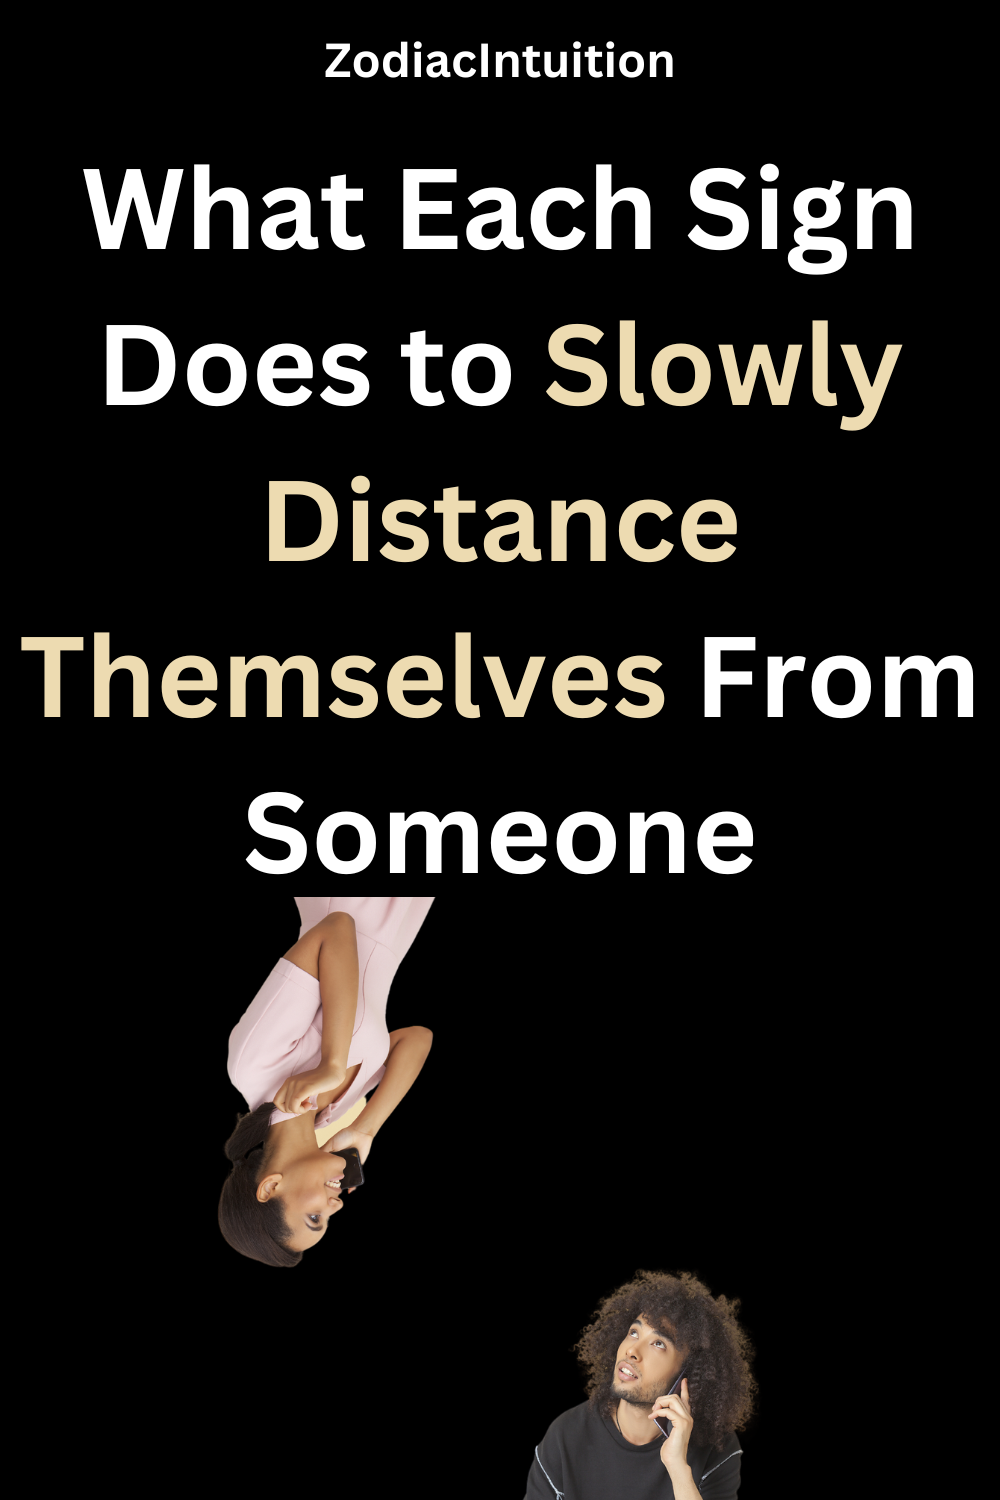 What Each Sign Does to Slowly Distance Themselves From Someone